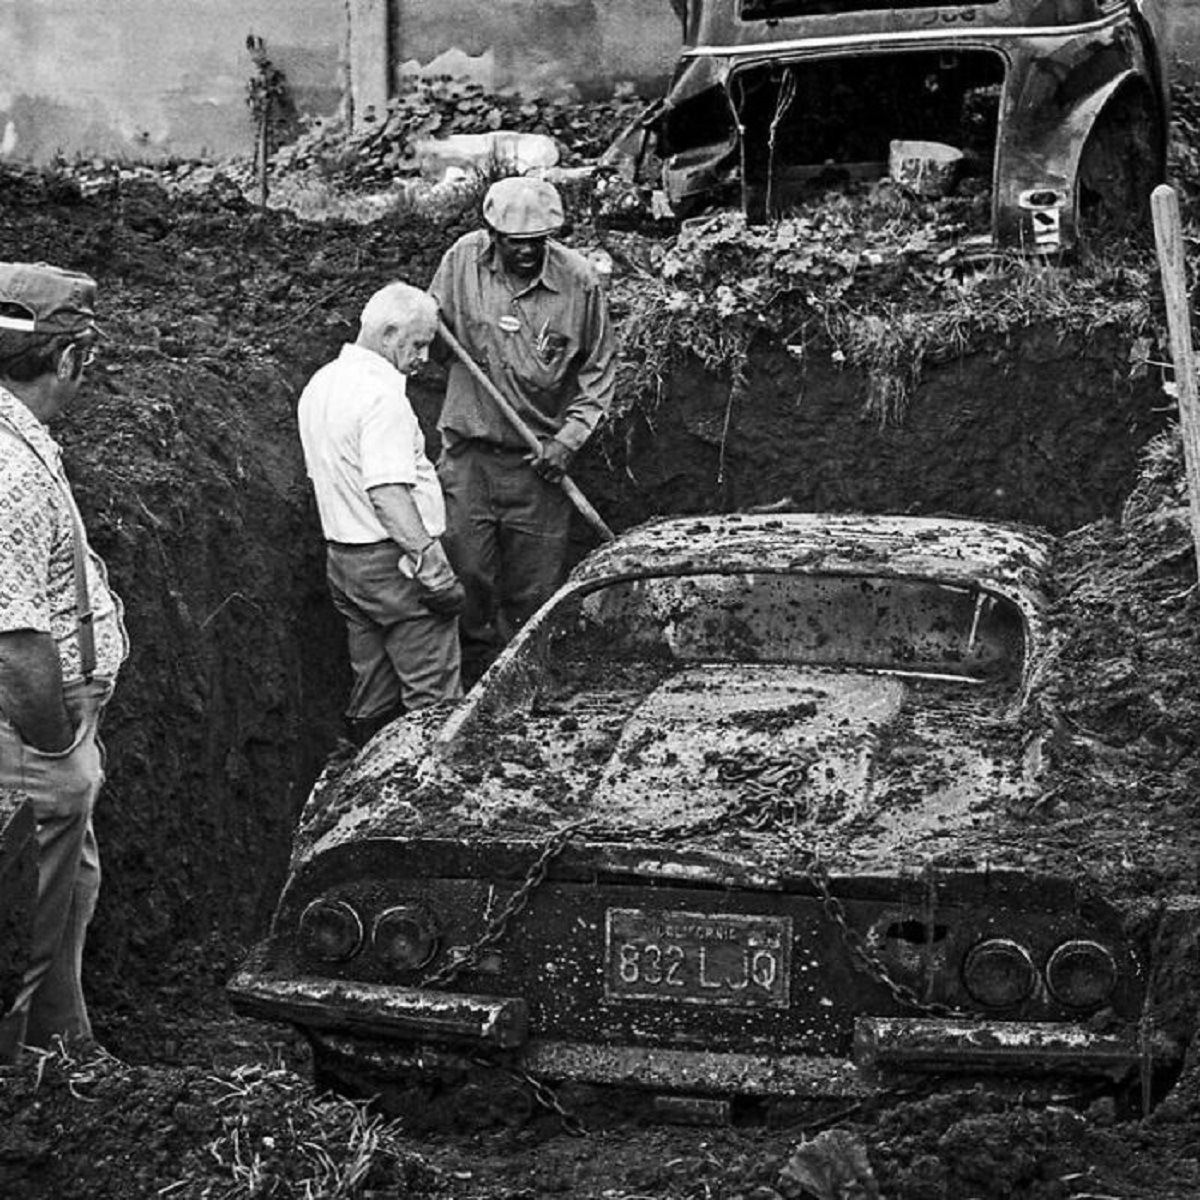 In 1978, A Remarkable Discovery Was Made In A Los Angeles Yard When Children Playing Uncovered A Ferrari Buried Just Beneath The Surface. The Police Were Notified, And It Was Revealed That The Car Had Been Reported Stolen Four Years Earlier